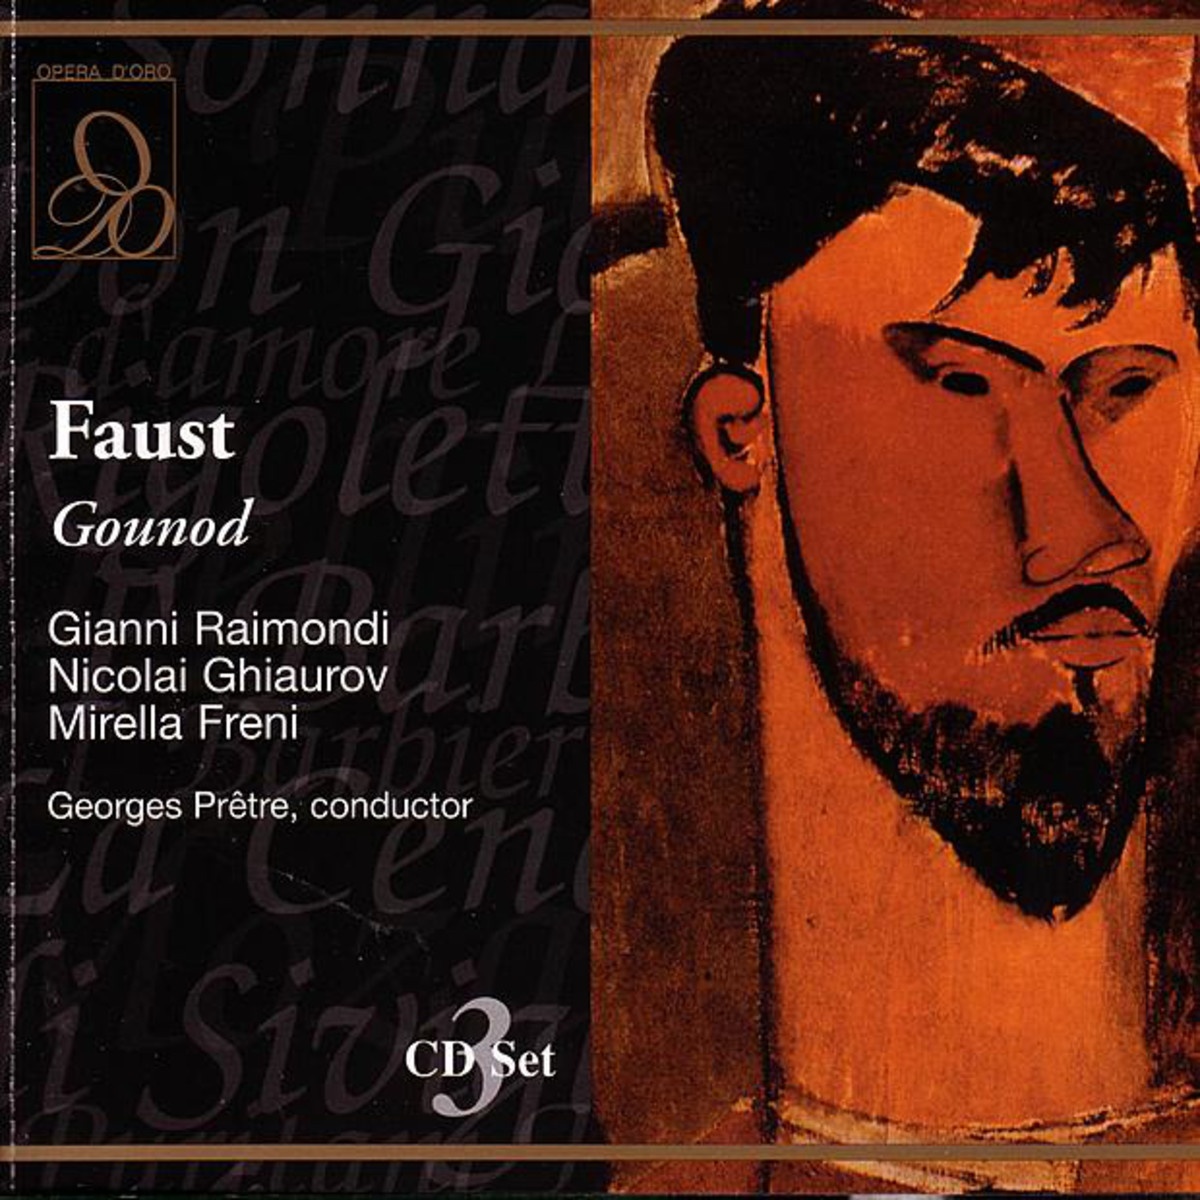 Faust (1986 Digital Remaster), Act IV: Gloire immortelle (Choeur)